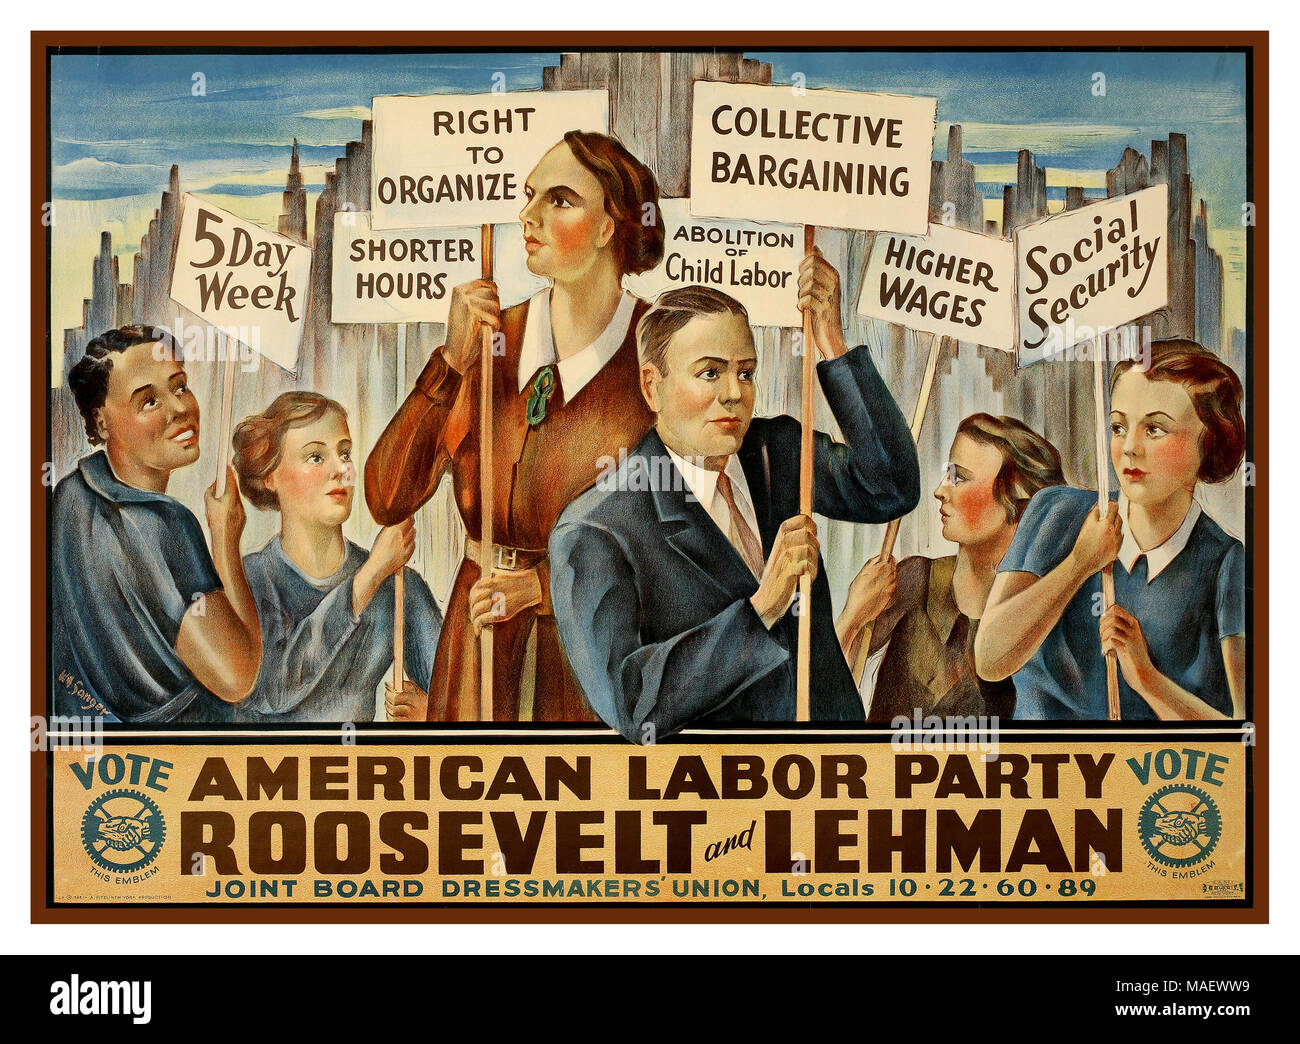 Vintage Political Poster 1936 American Labor Party Roosevelt and Lehman depicting people picketing with activists signs 'joint board dressmakers union' with city in background by Artist William Sanger Stock Photo